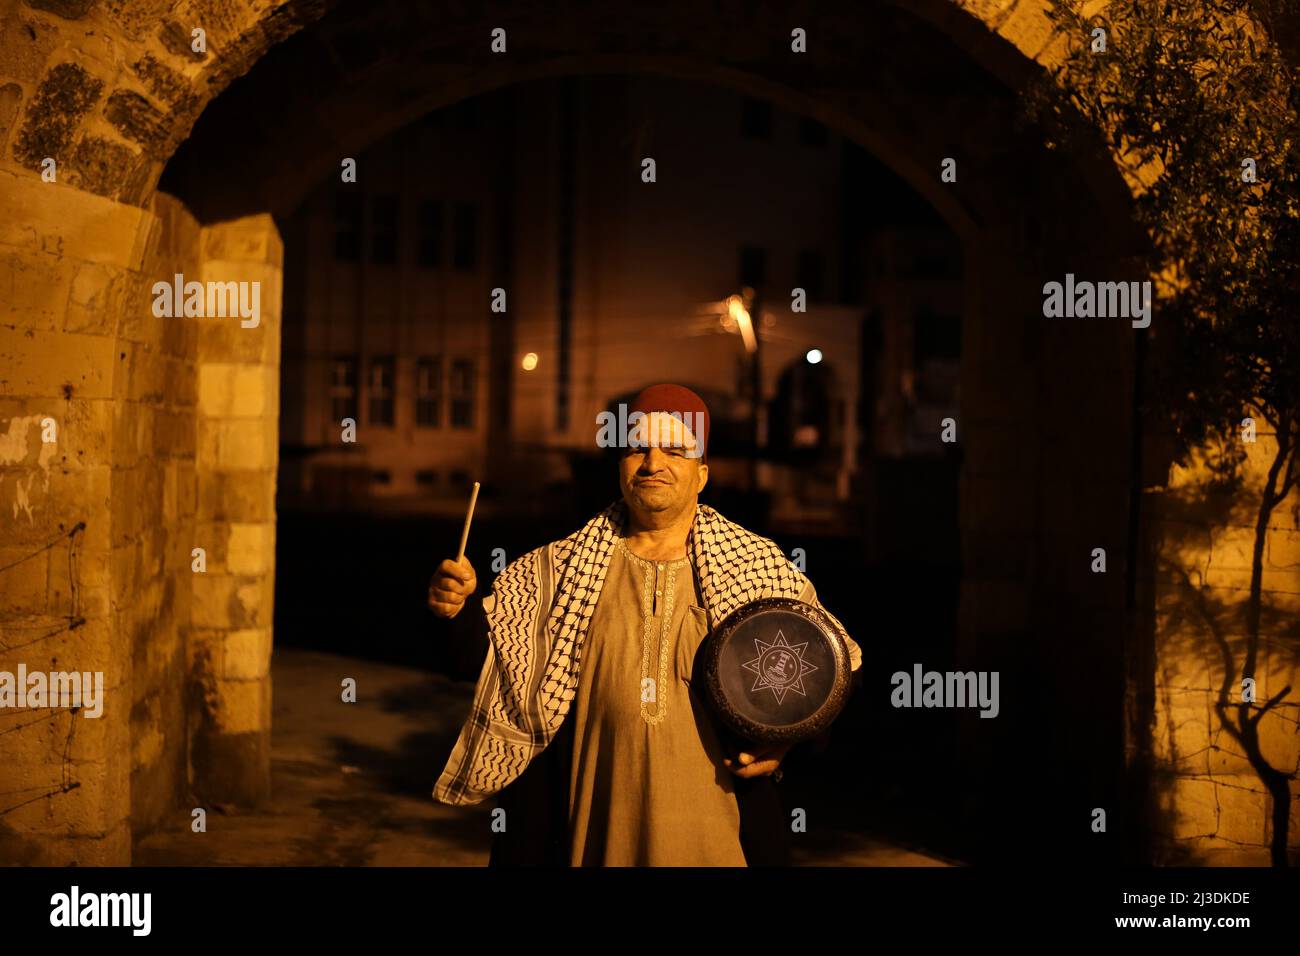 50-year-old Palestinian drummer 'Al-Masharati', Nizar Al-Dabbas, plays the drum to wake Muslims up for Suhoor (before dawn) during the first day of the holy month of Ramadan in Khan Yunis, Gaza. Stock Photo